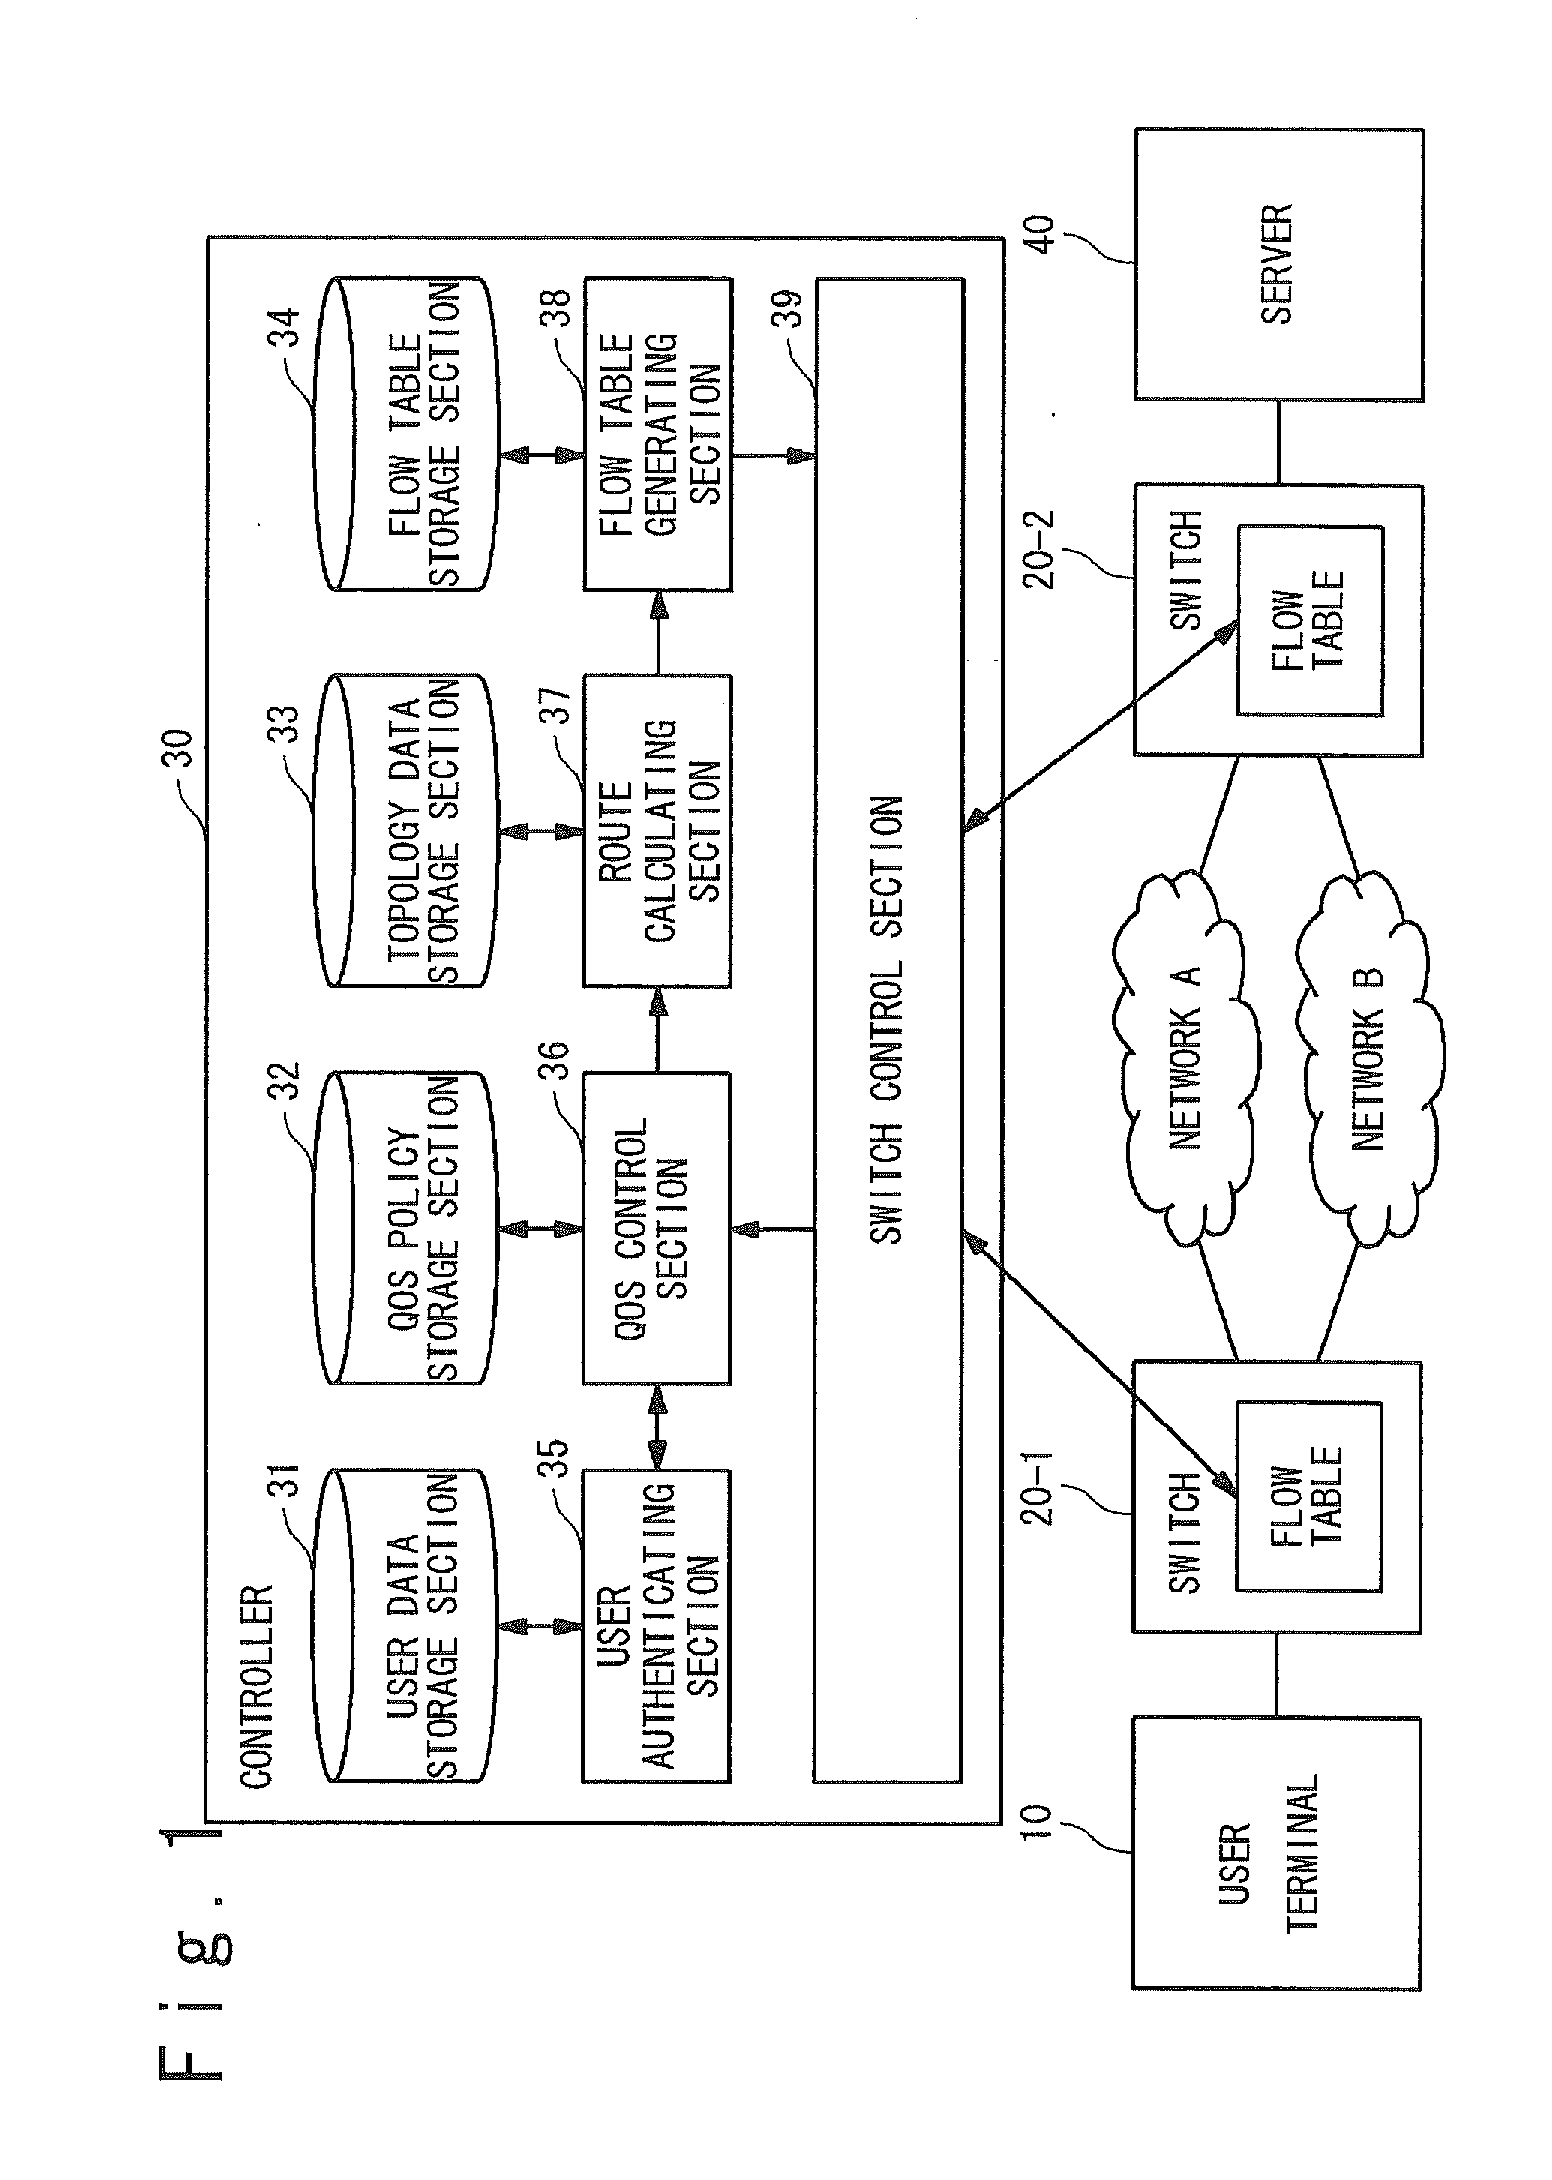 Network system, controller and QOS control method